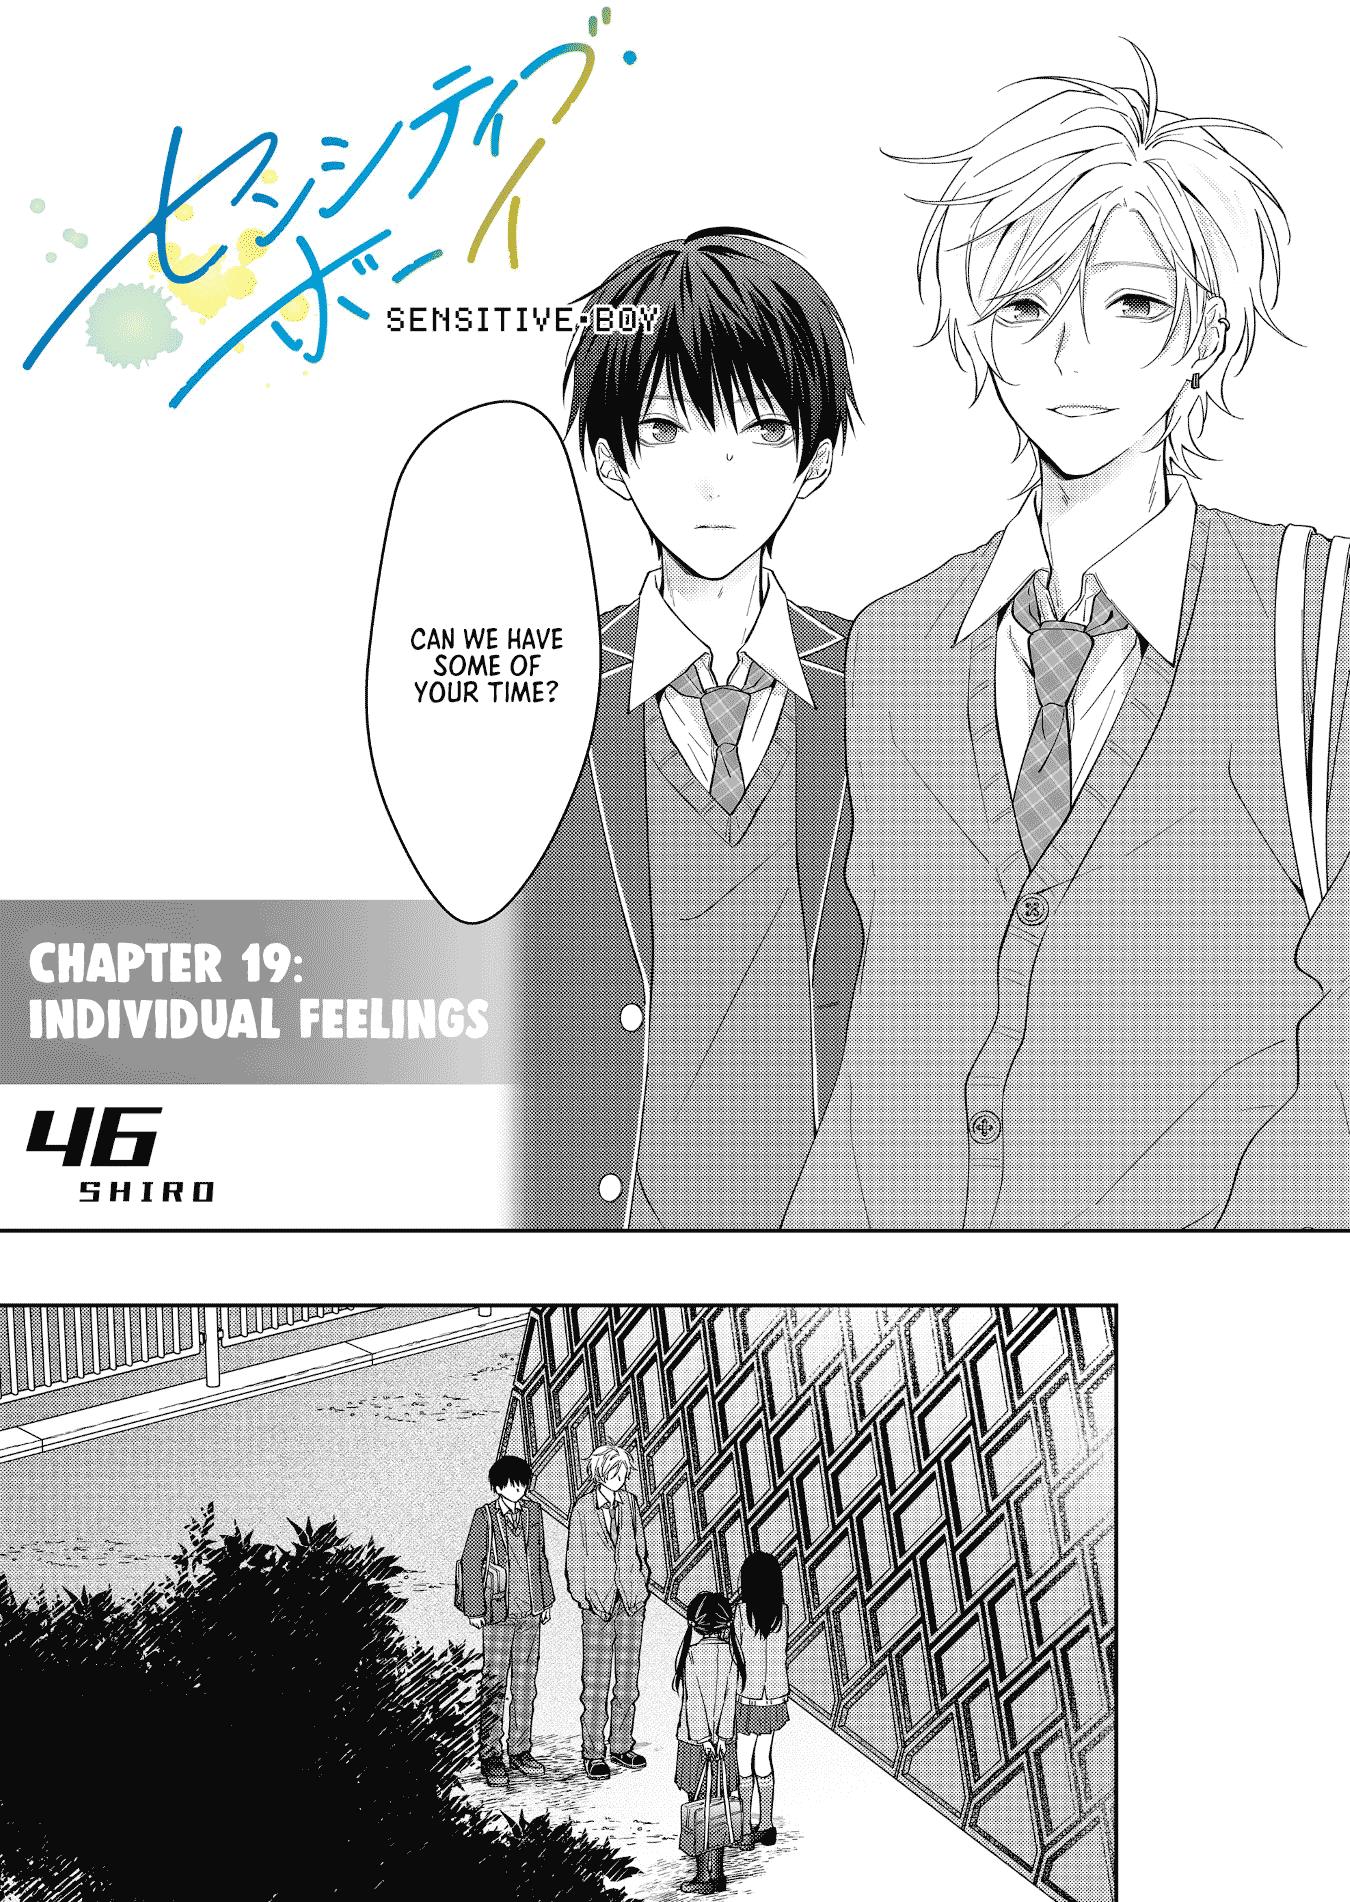 Sensitive Boy Chapter 19: Individual Feelings - Picture 1